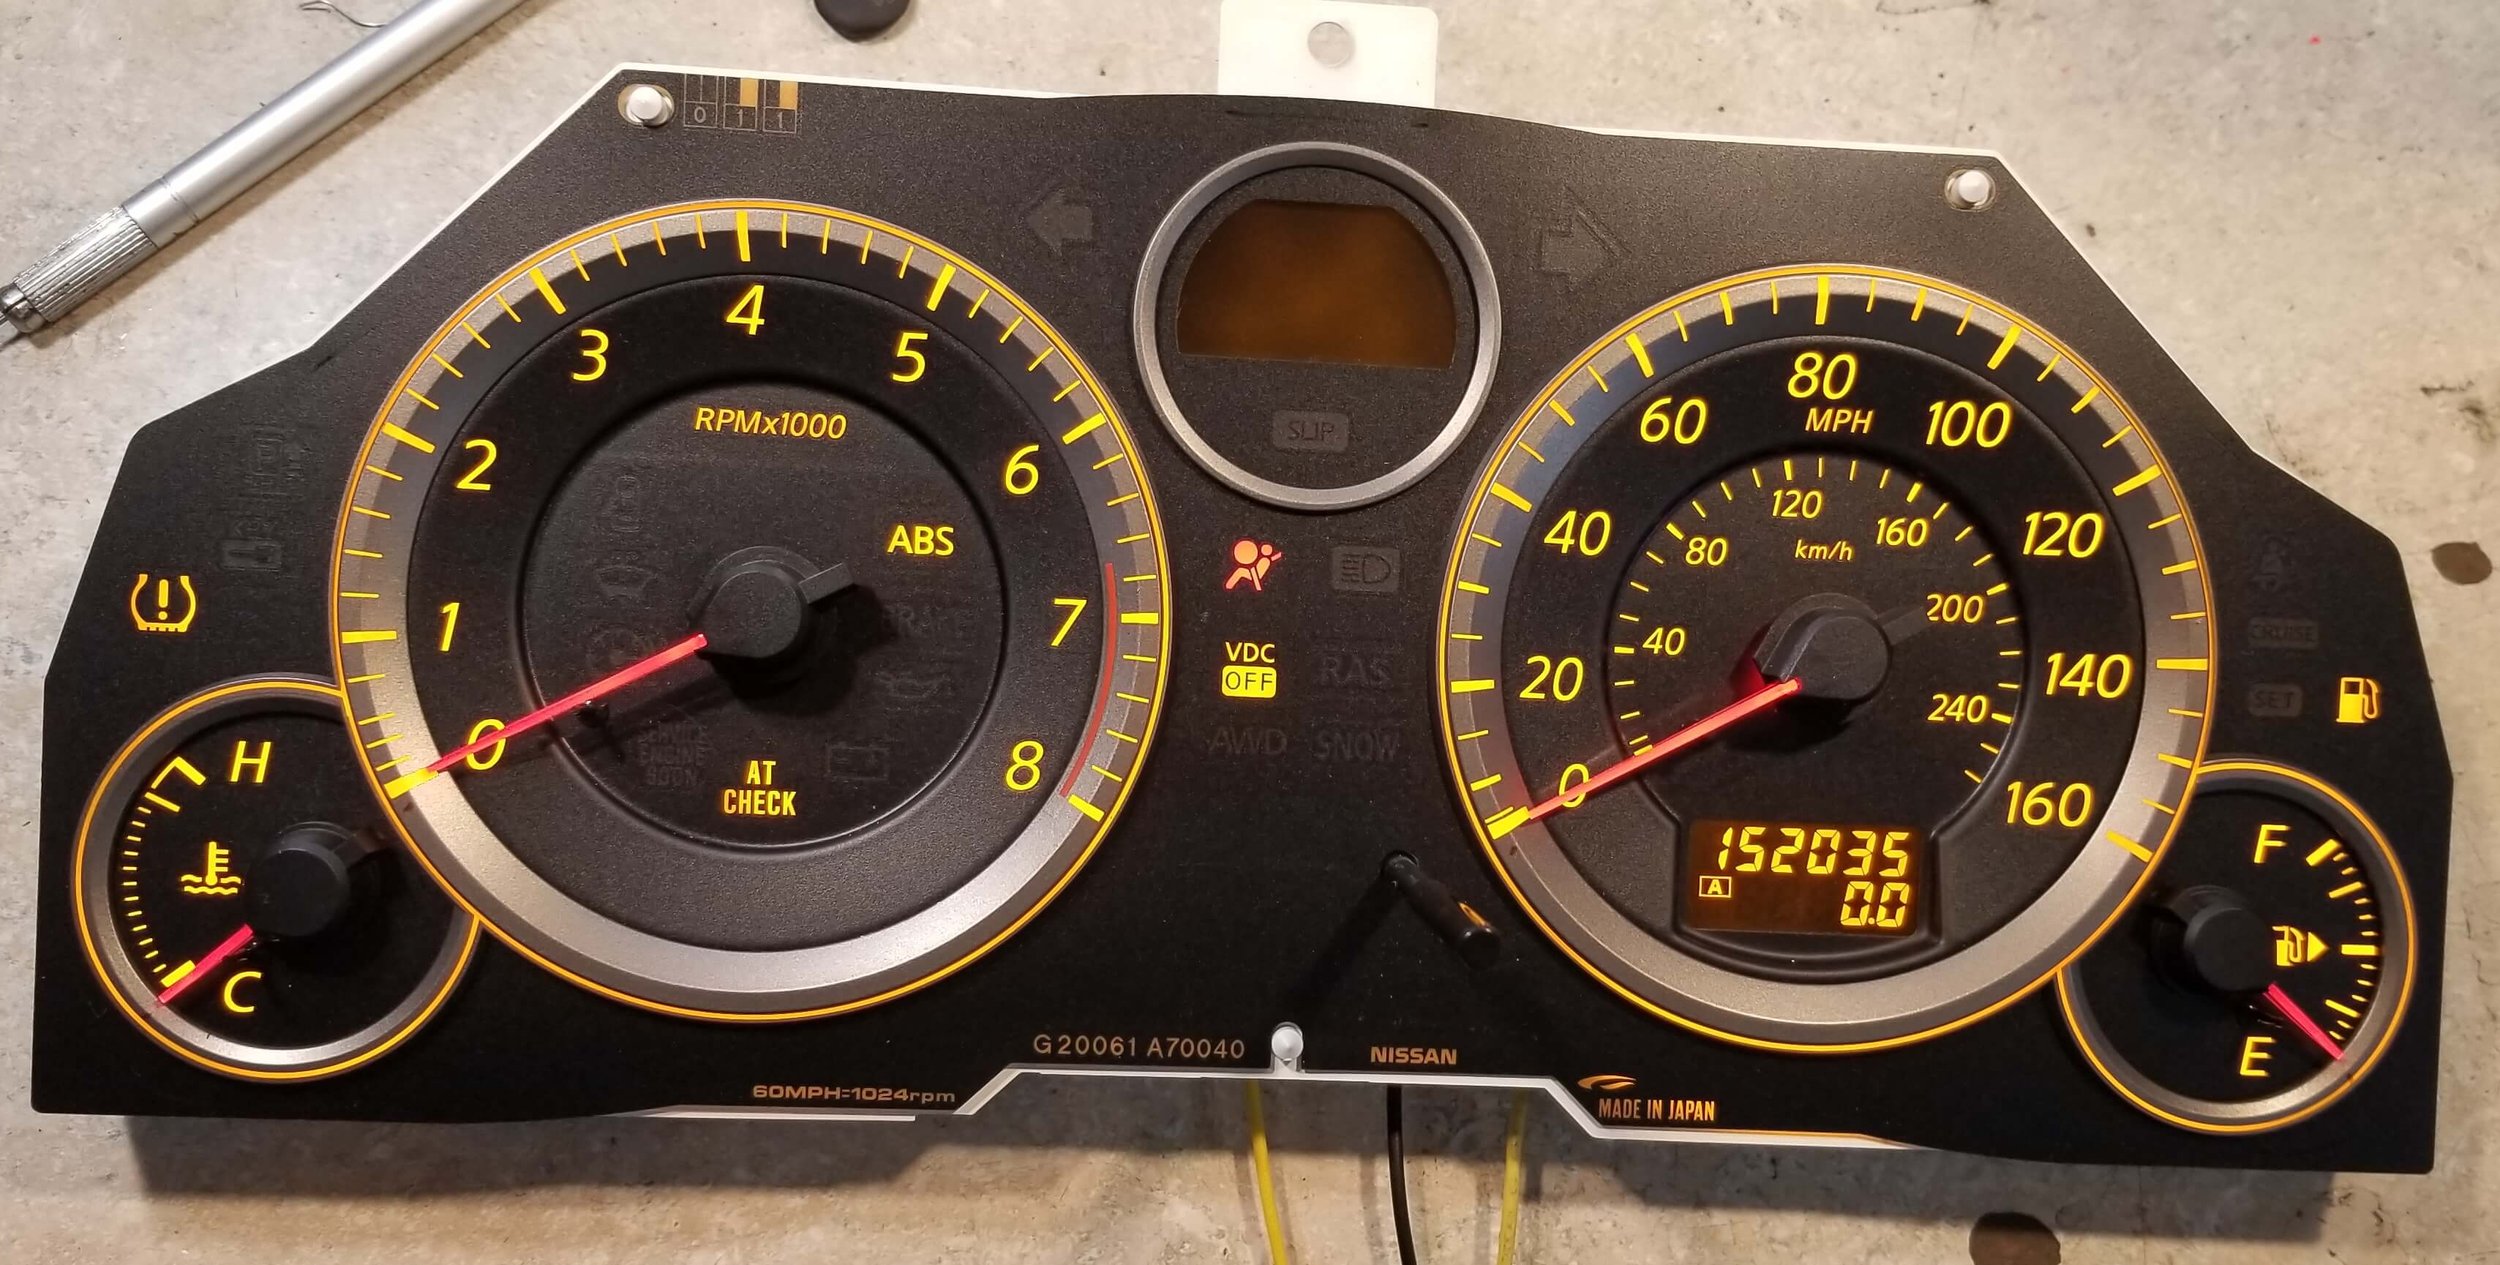 g35 gas gauge and leds out in background.jpg